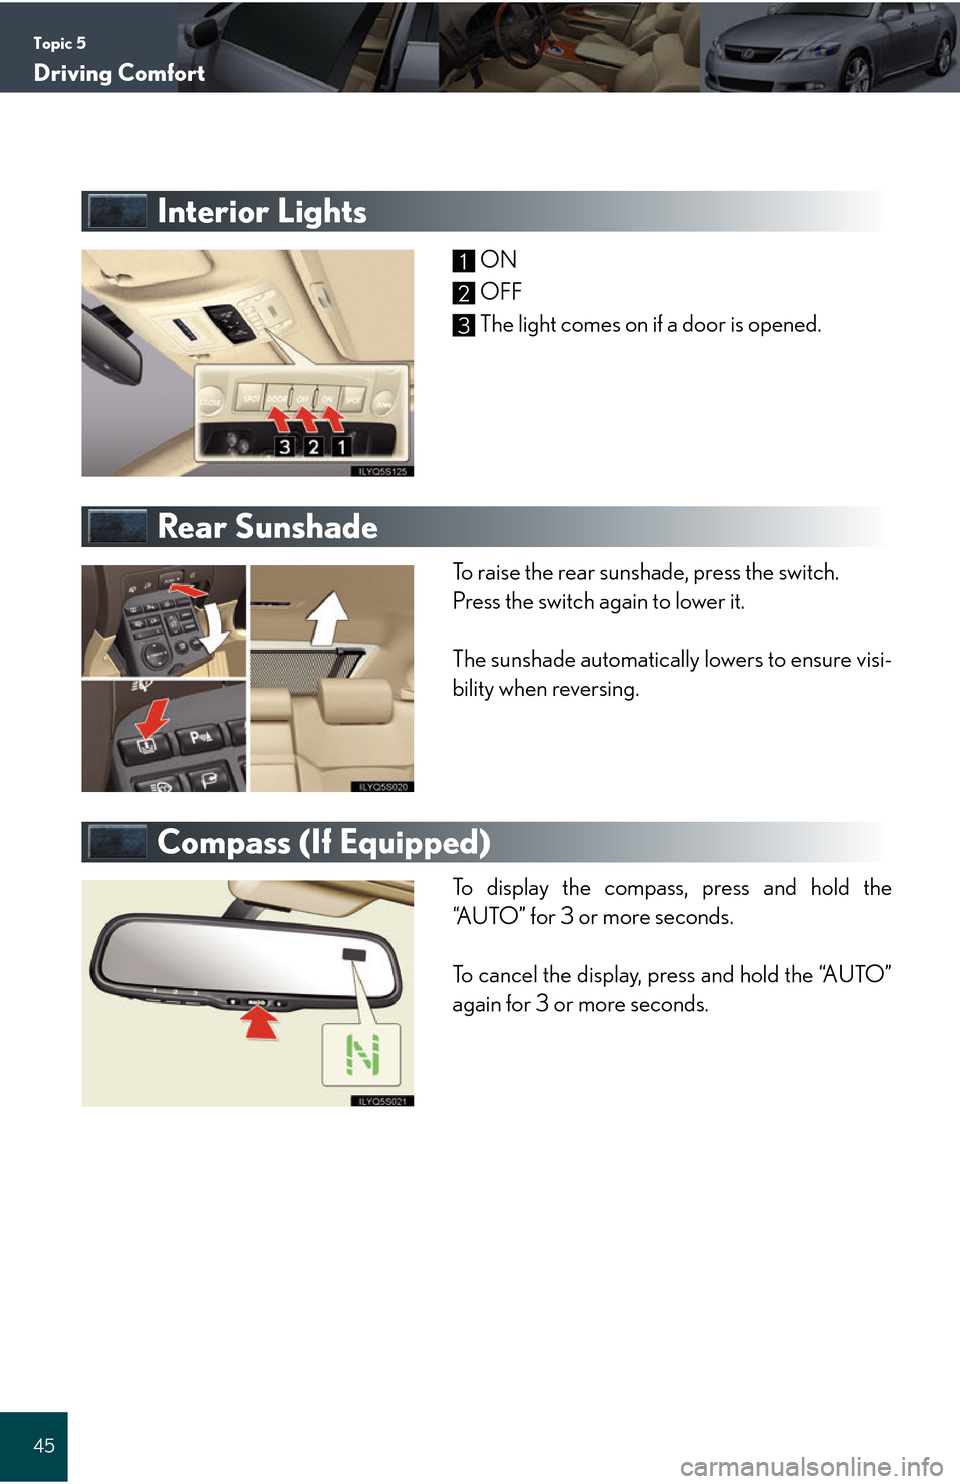 Lexus GS450h 2008  Using the audio system / LEXUS 2008 GS450H QUICK GUIDE  (OM30B13U) Service Manual Topic 5
Driving Comfort
45
Interior Lights
ON
OFF
The light comes on if a door is opened.
Rear Sunshade 
To raise the rear sunshade, press the switch.
Press the switch again to lower it.
The sunshade 